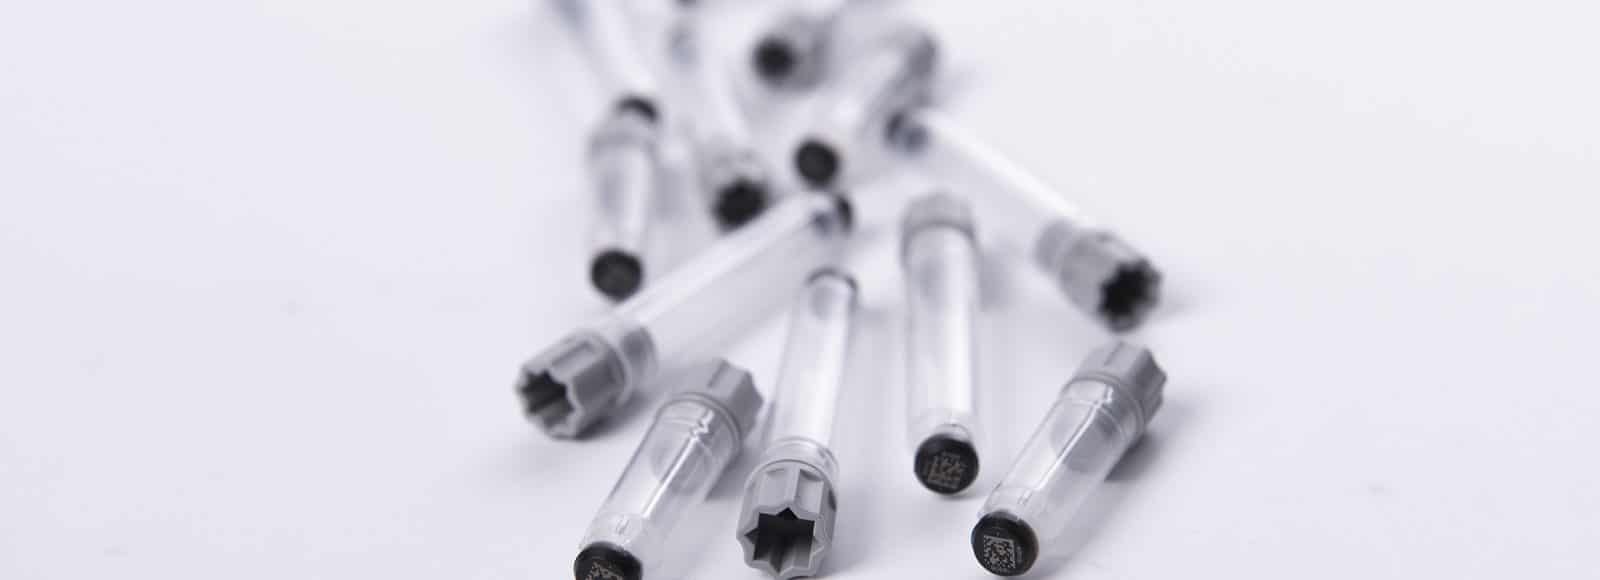 Micronic tubes scattered